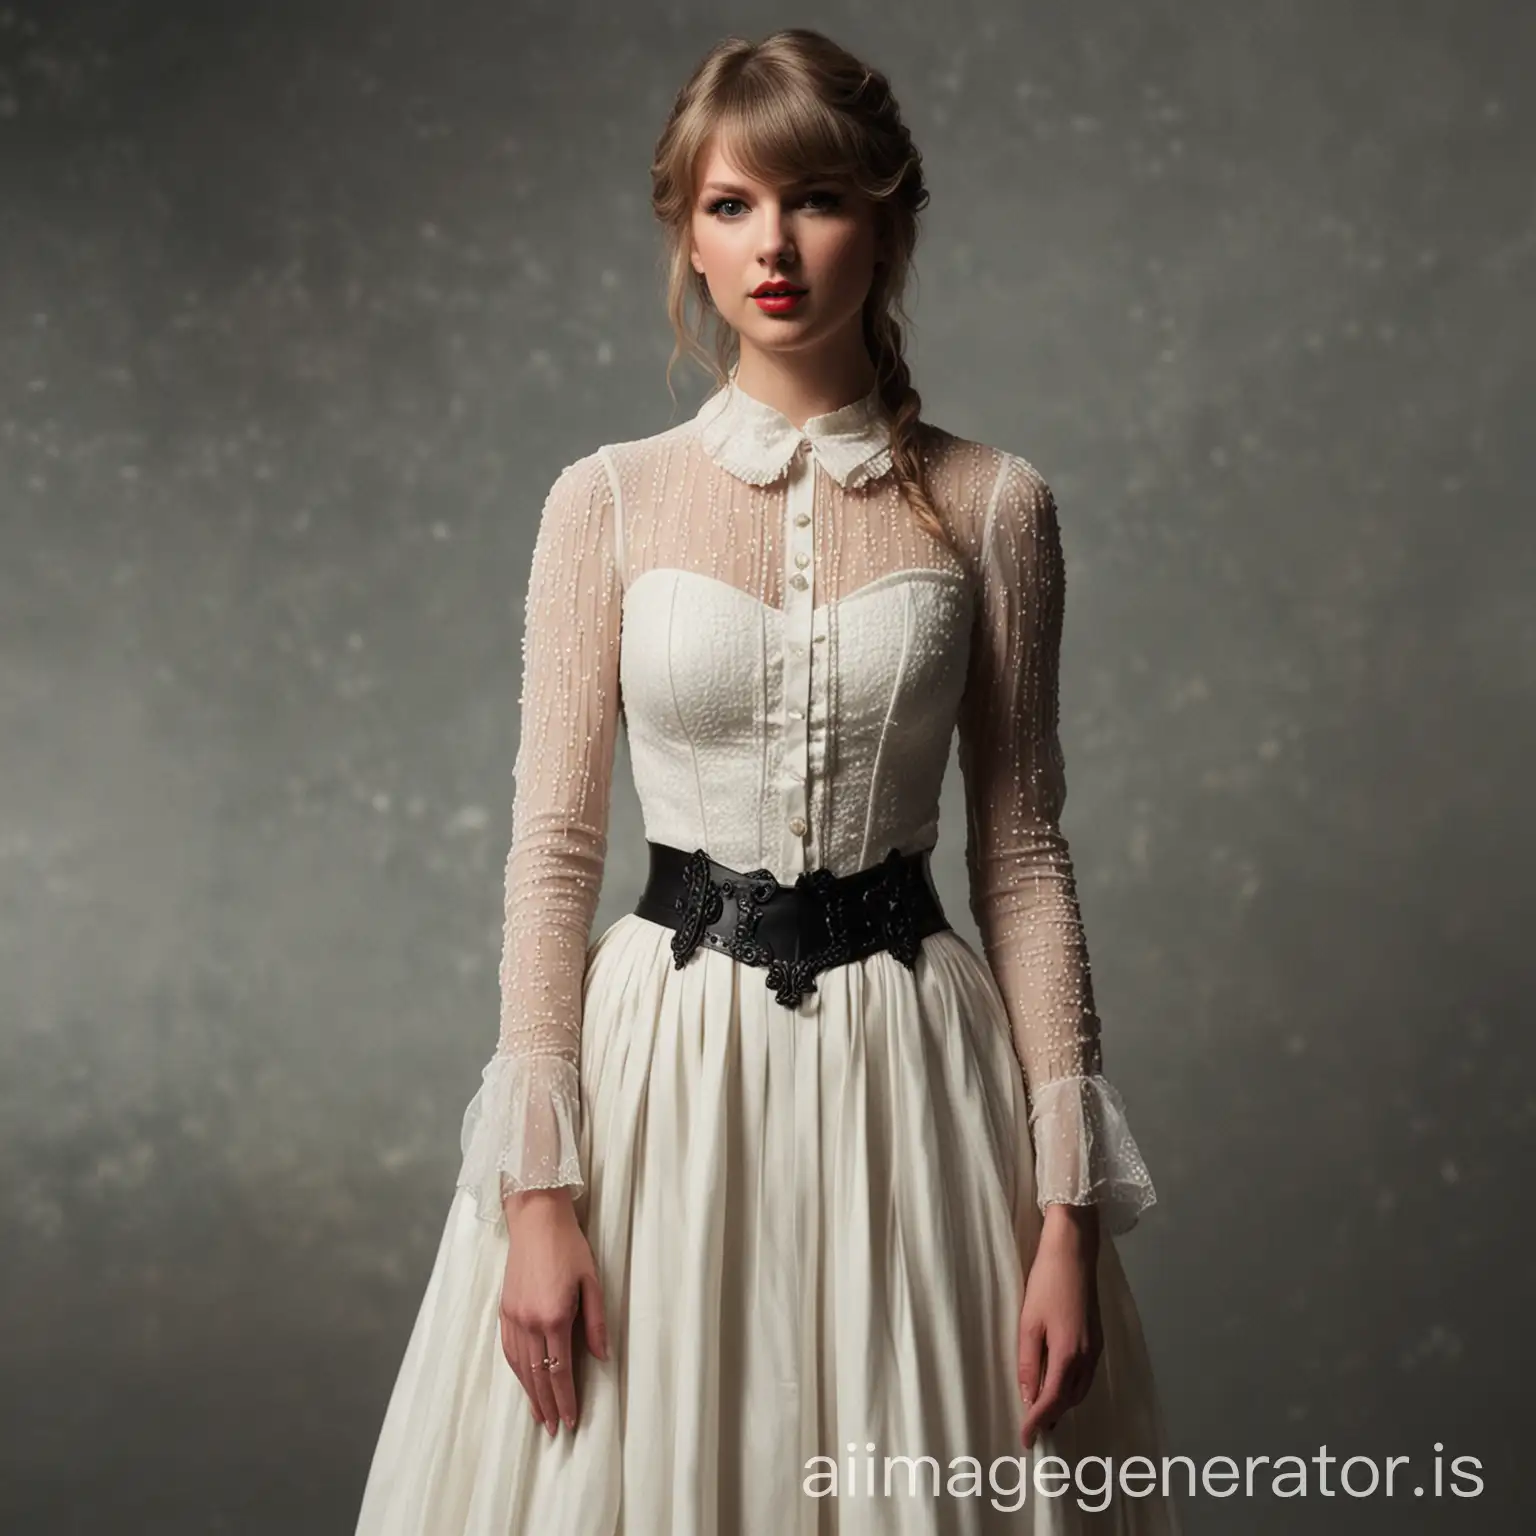 Taylor-Swift-Concert-Outfit-Victorian-Ethereal-Look-for-Tortured-Poets-Department-Album-Concert